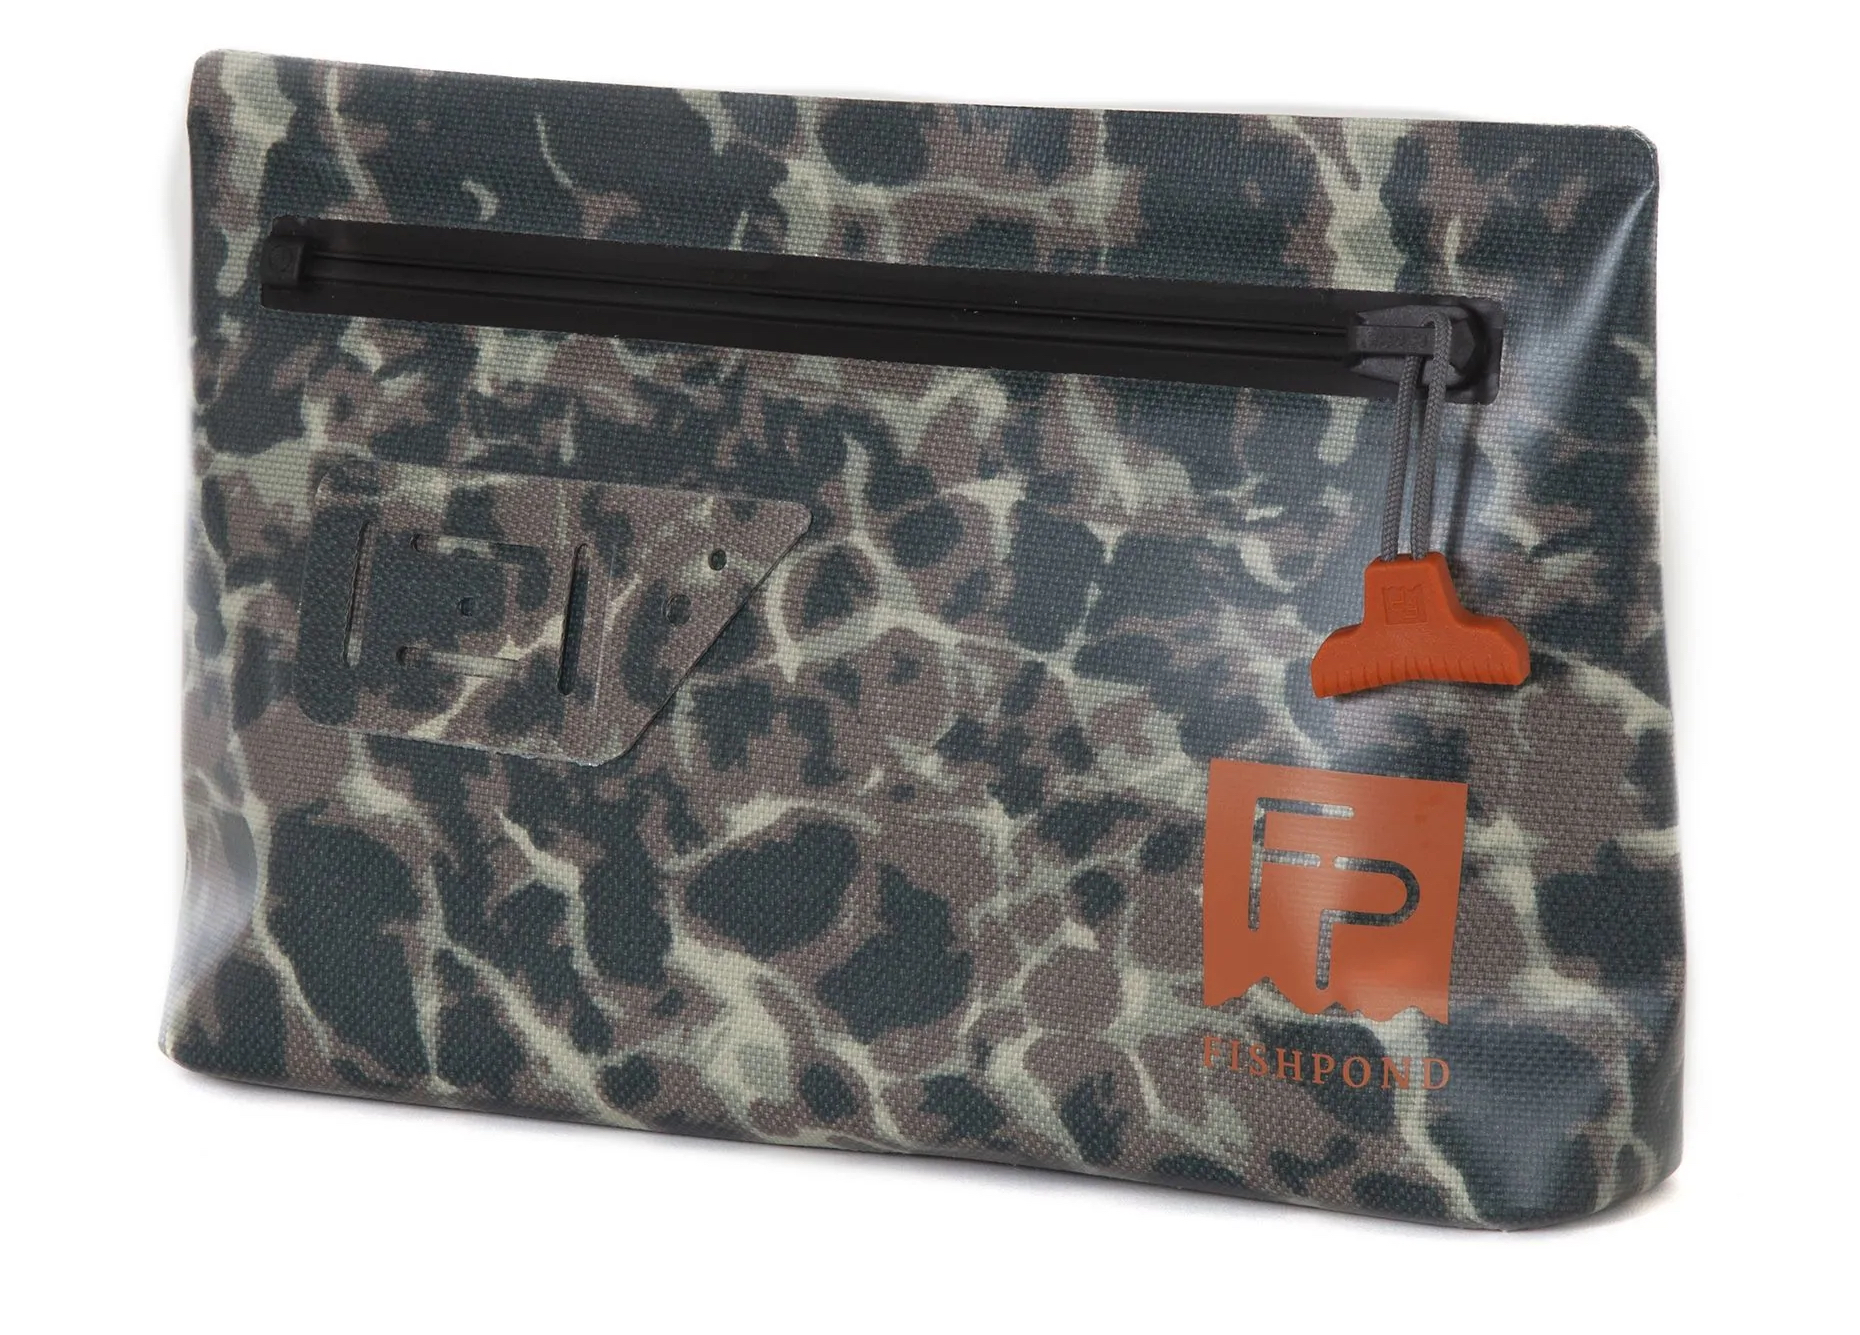 Fishpond Thunderhead Submersible Pouch Eco riverbed camo, Bags, Bags and  Backpacks, Equipment